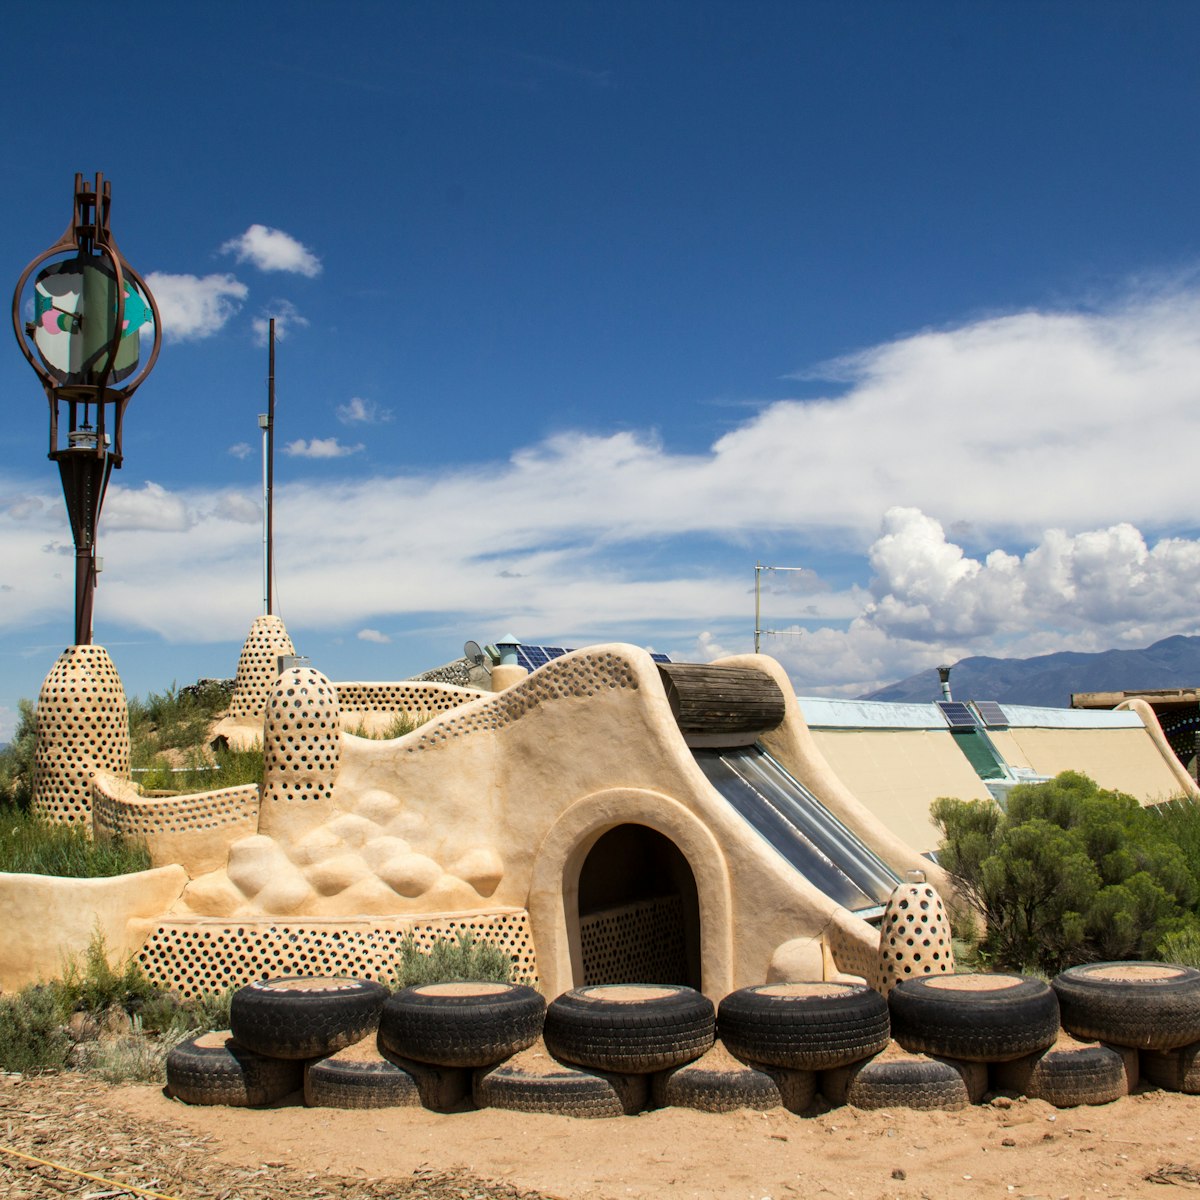 TAOS, NEW MEXICO-AUGUST 13: Building materials sit outside an earthship being built in Taos on August 13, 2014. Earthships are environmentally friendly homes made of recycled materials.
210755425
unusual, usa, bottles, green, abode, earth, community, new, recycling, utilization, recycle, ecology, tires, living, nm, adobe, building, cistern, artsy, energy, solar, efficient, architecture, mexico, home, sustainable, house, art, space, environment, structure, innovative, cutting edge, greater world earthship community, earthship, biotecture, unusual, america, usa, bottles, green, abode, earth, community, new, recycling, utilization, recycle, ecology, tires, living, nm, adobe, building, cistern, artsy, energy, solar, efficient, architecture, mexico, home, sustainable, house, art, space, environment, structure, innovative, cutting edge, greater world earthship community, earthship, biotecture